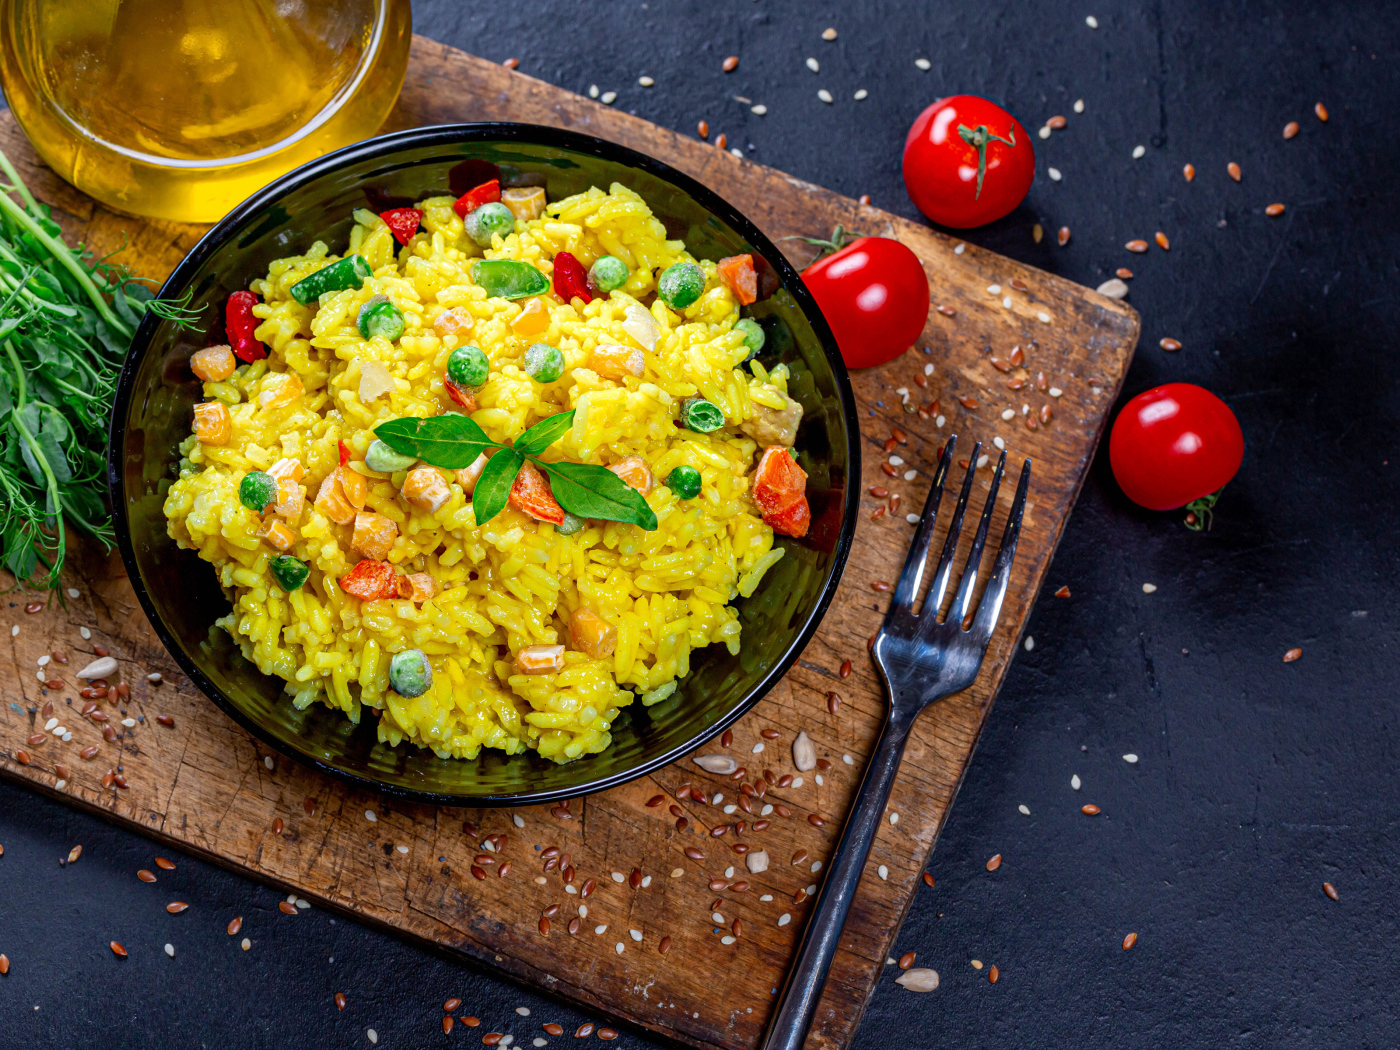 Rice with vegetables on a table with butter, herbs and tomatoes